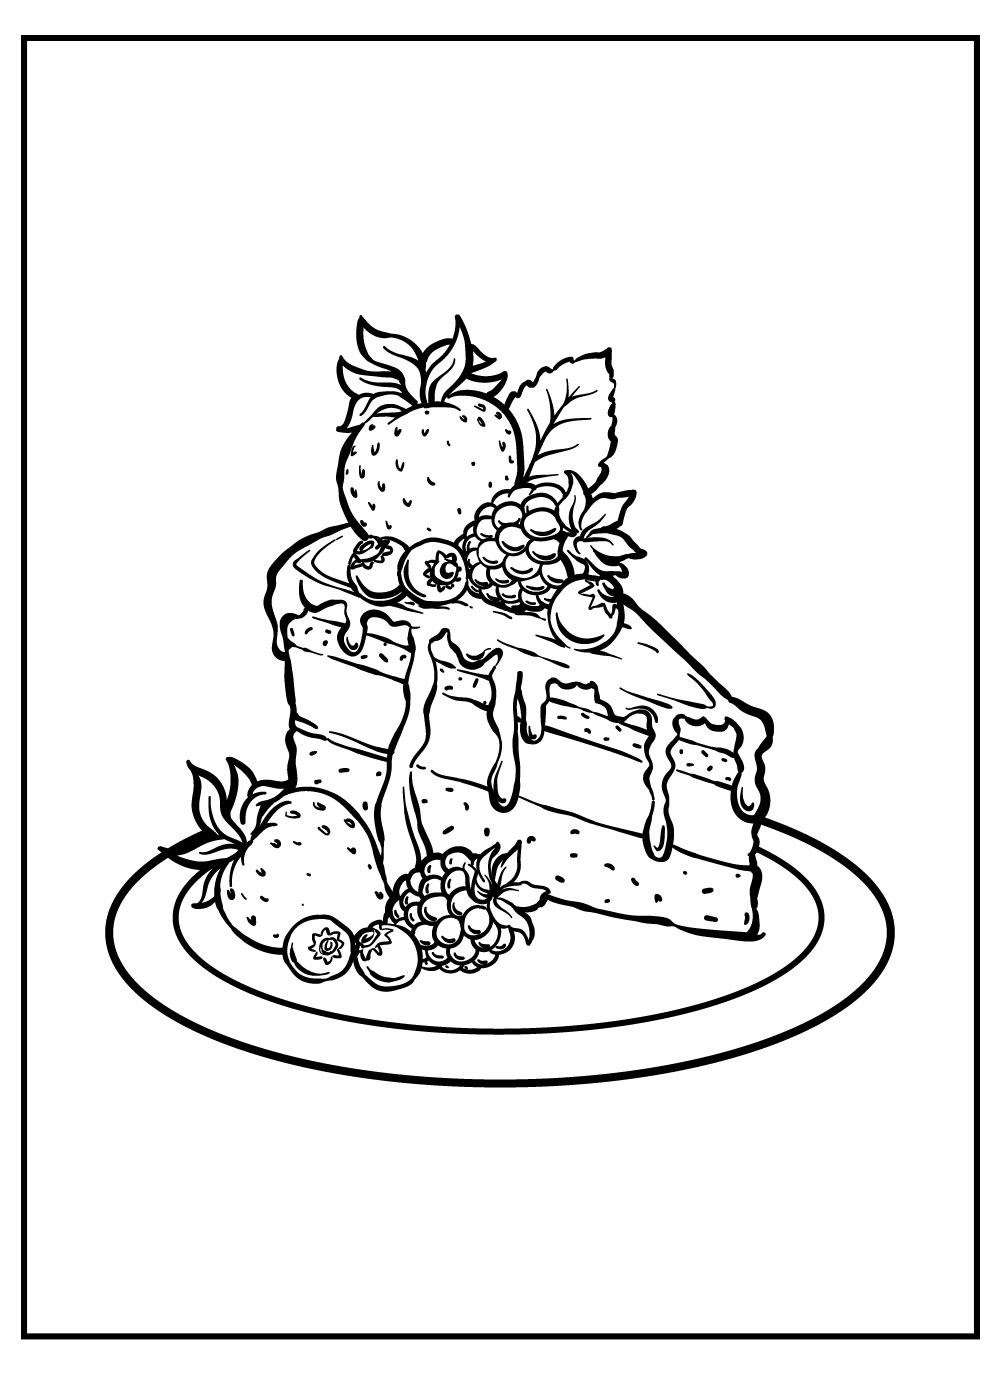 A Piece Of Birthday Cake For Children Coloring Page